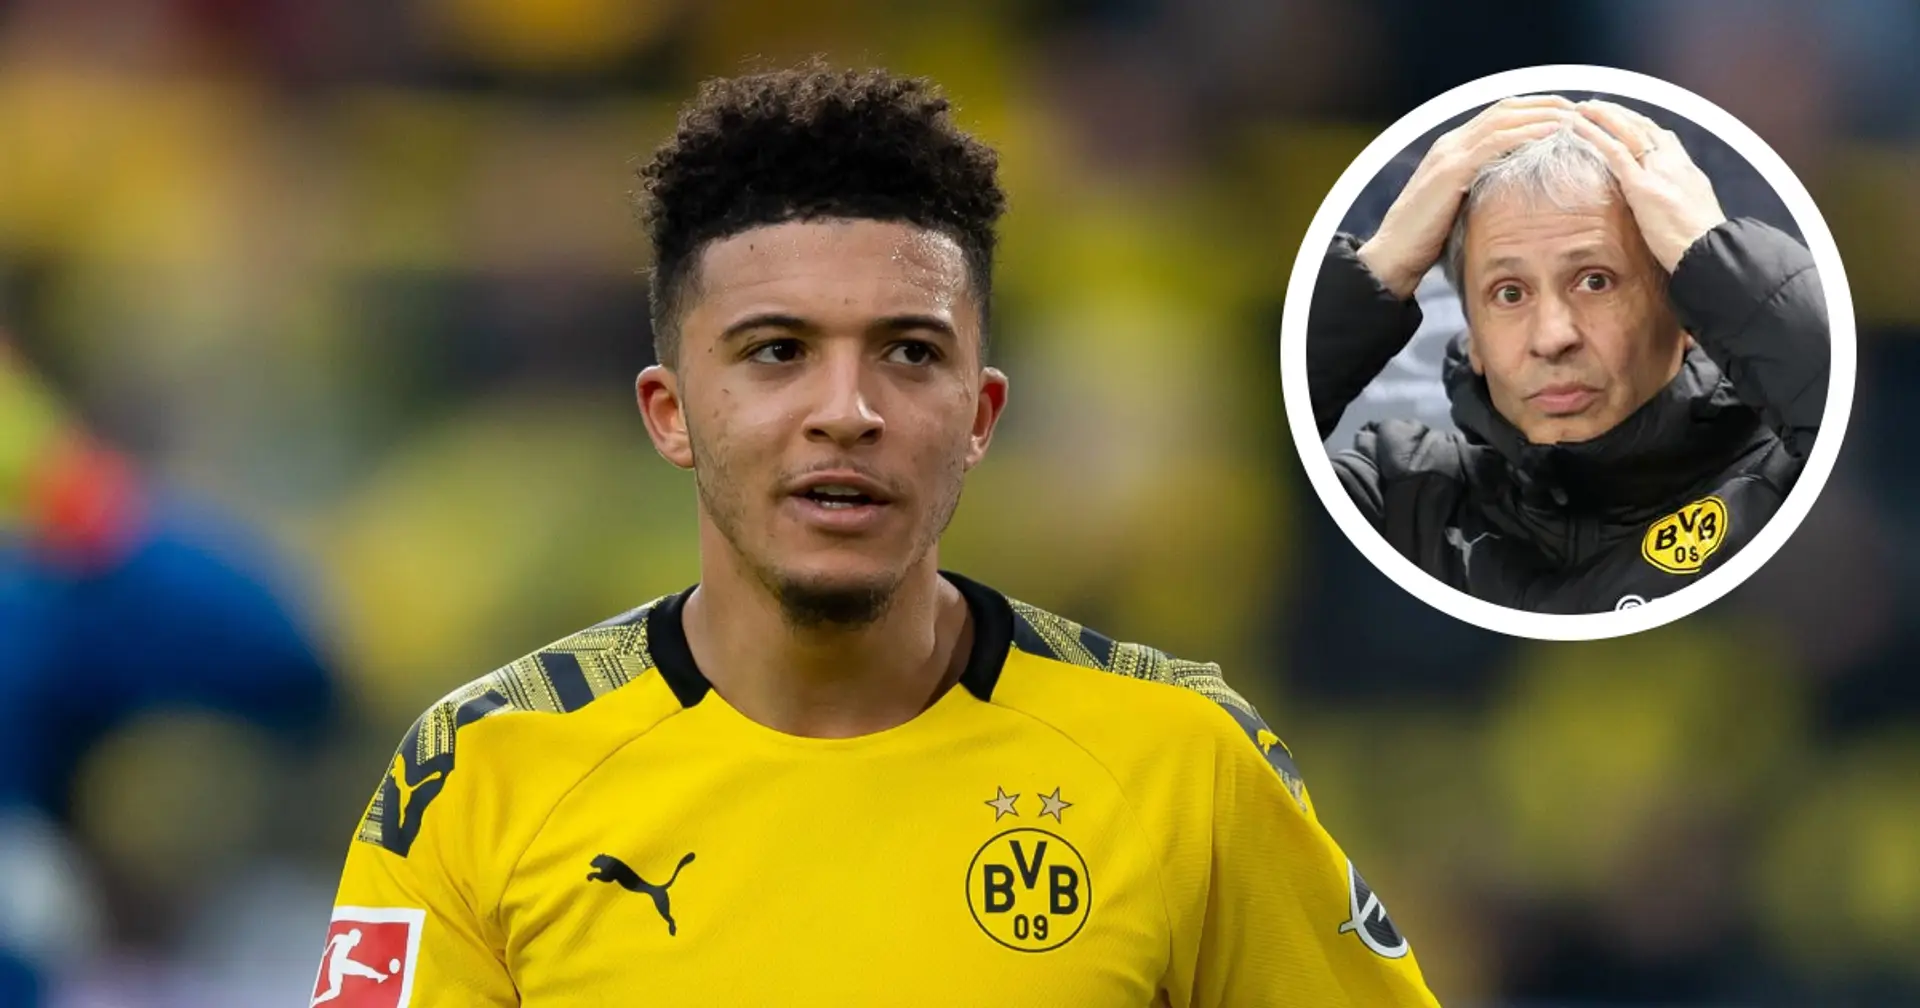 'He still has a lot to learn': Dortmund boss Favre names four areas Sancho can grow in